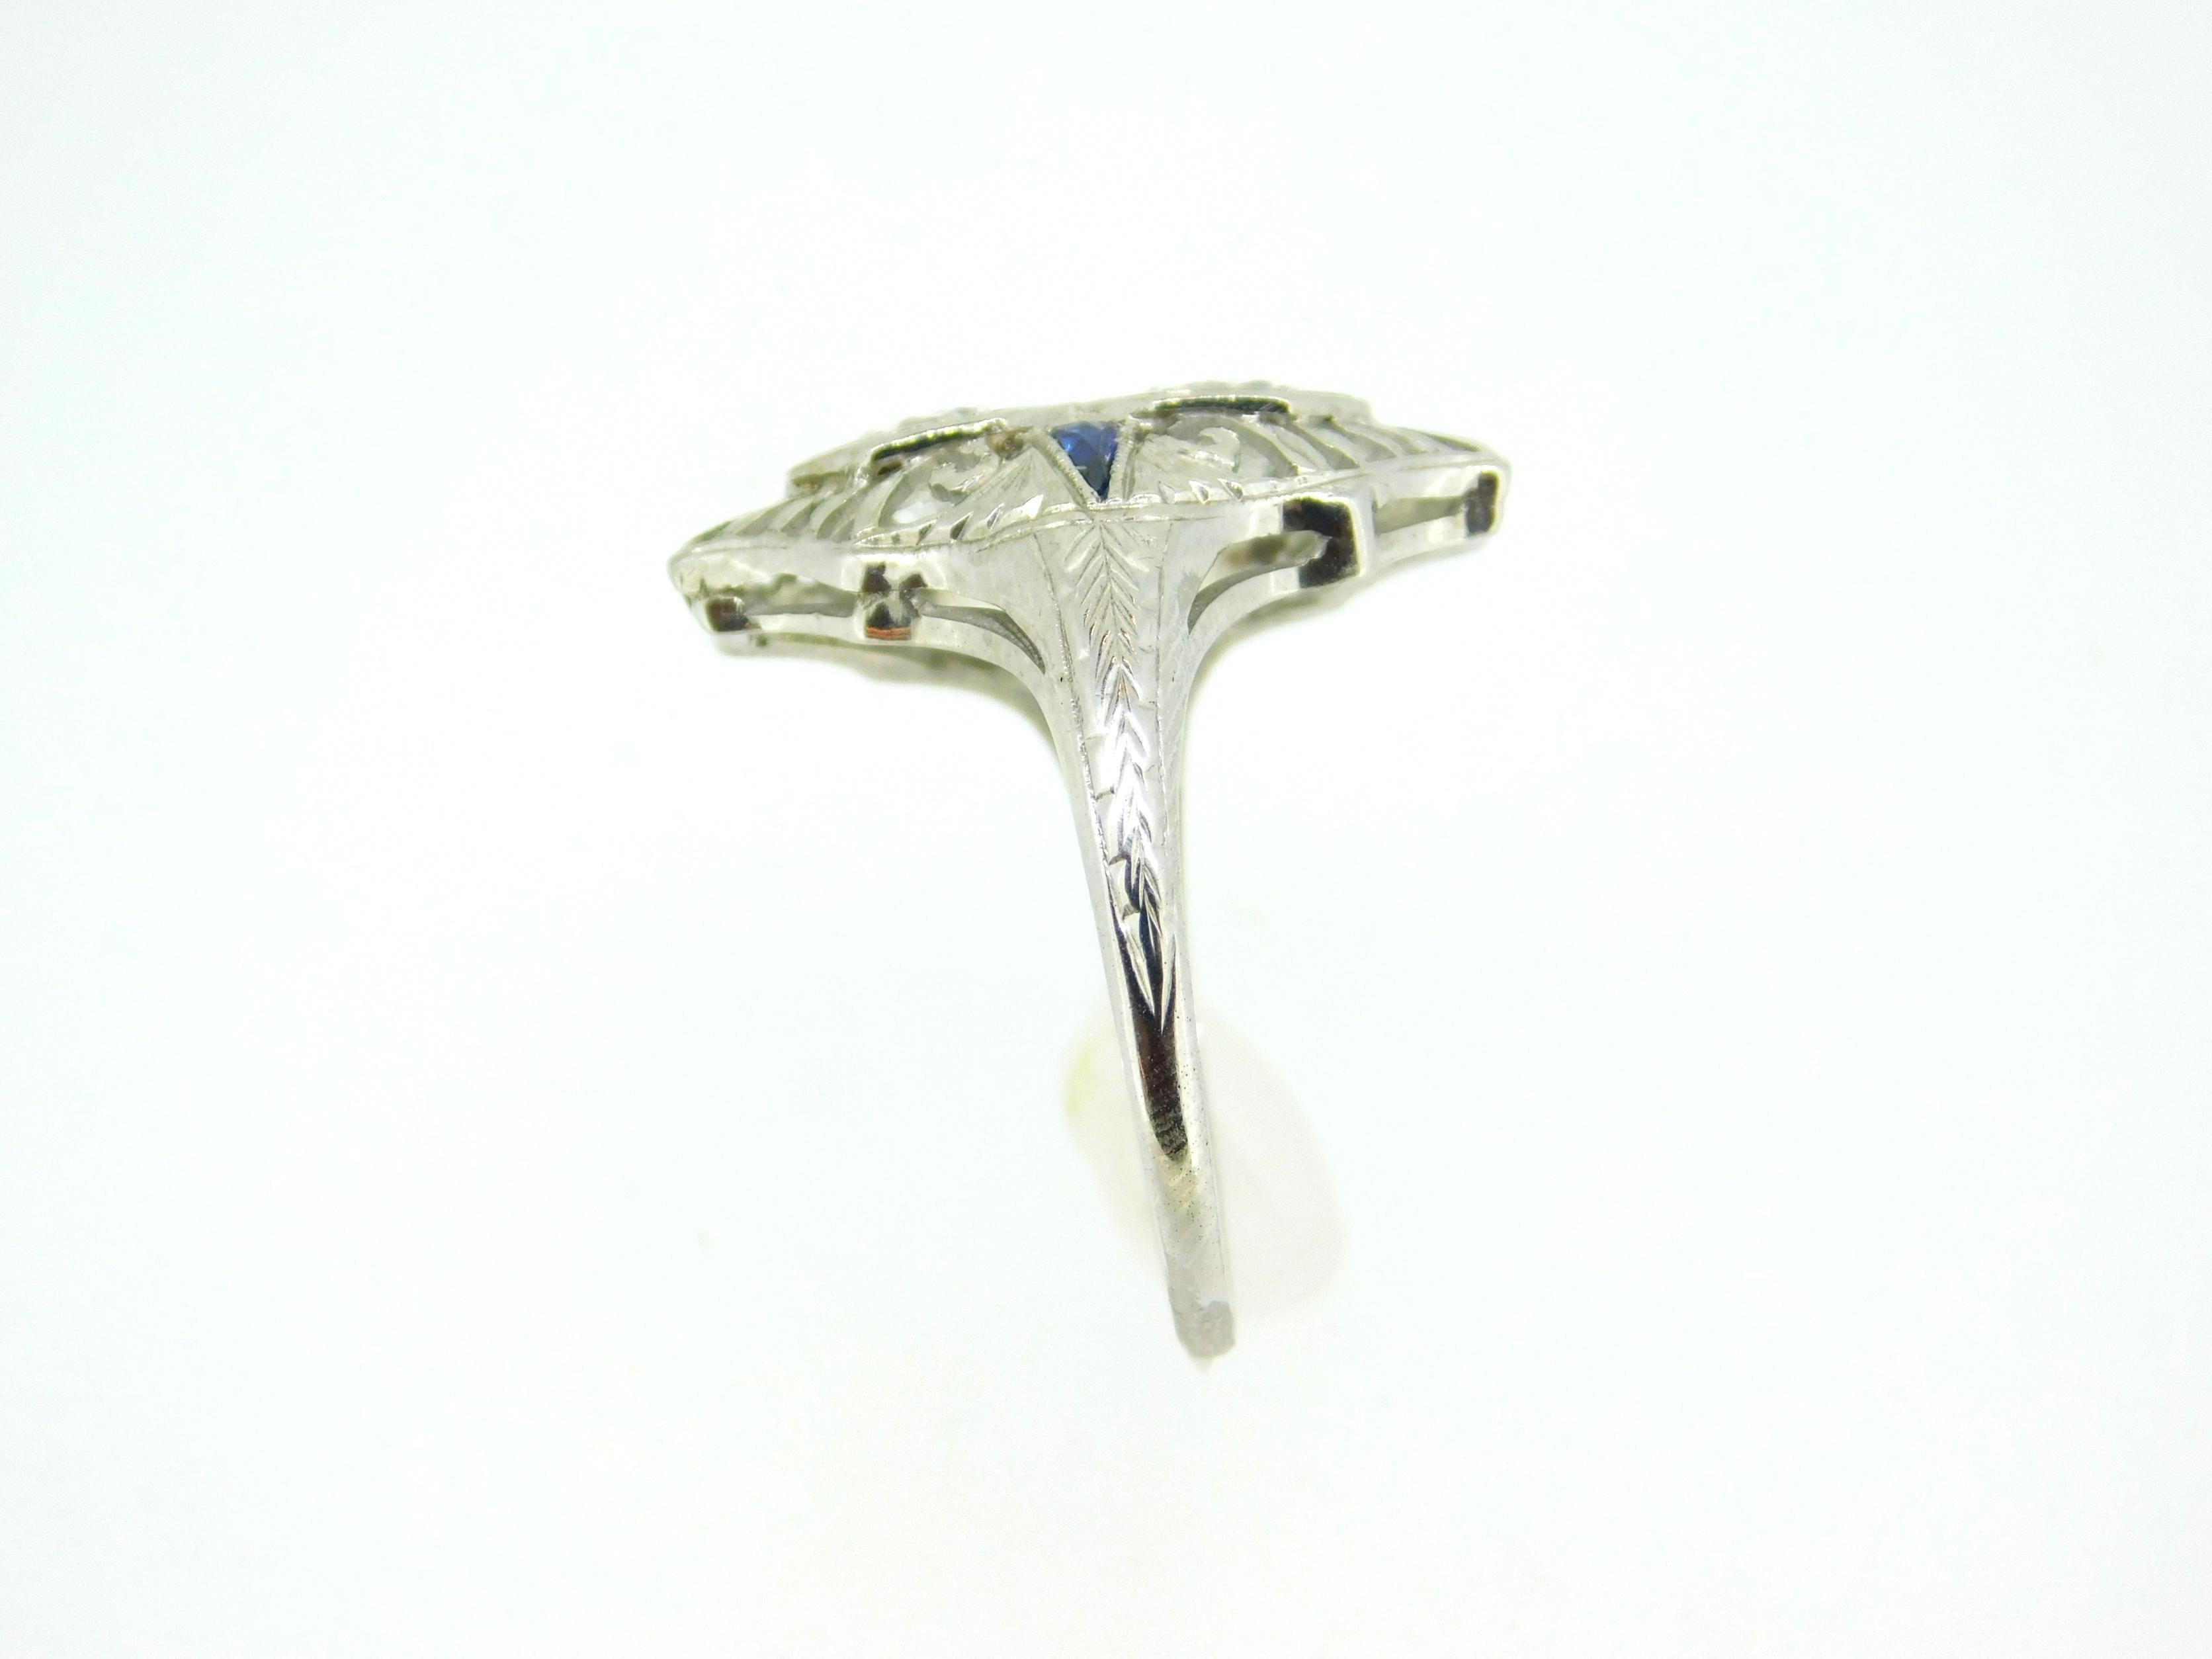 Art Deco 18k White Gold .92ct Diamond Filigree Ring (#J5050)

Art Deco 18k white gold featuring two round brilliant cut diamonds weighing about .92cts total and measuring about 4.8mm. The diamonds have VS2 to SI1 clarity and H-I color. There are two